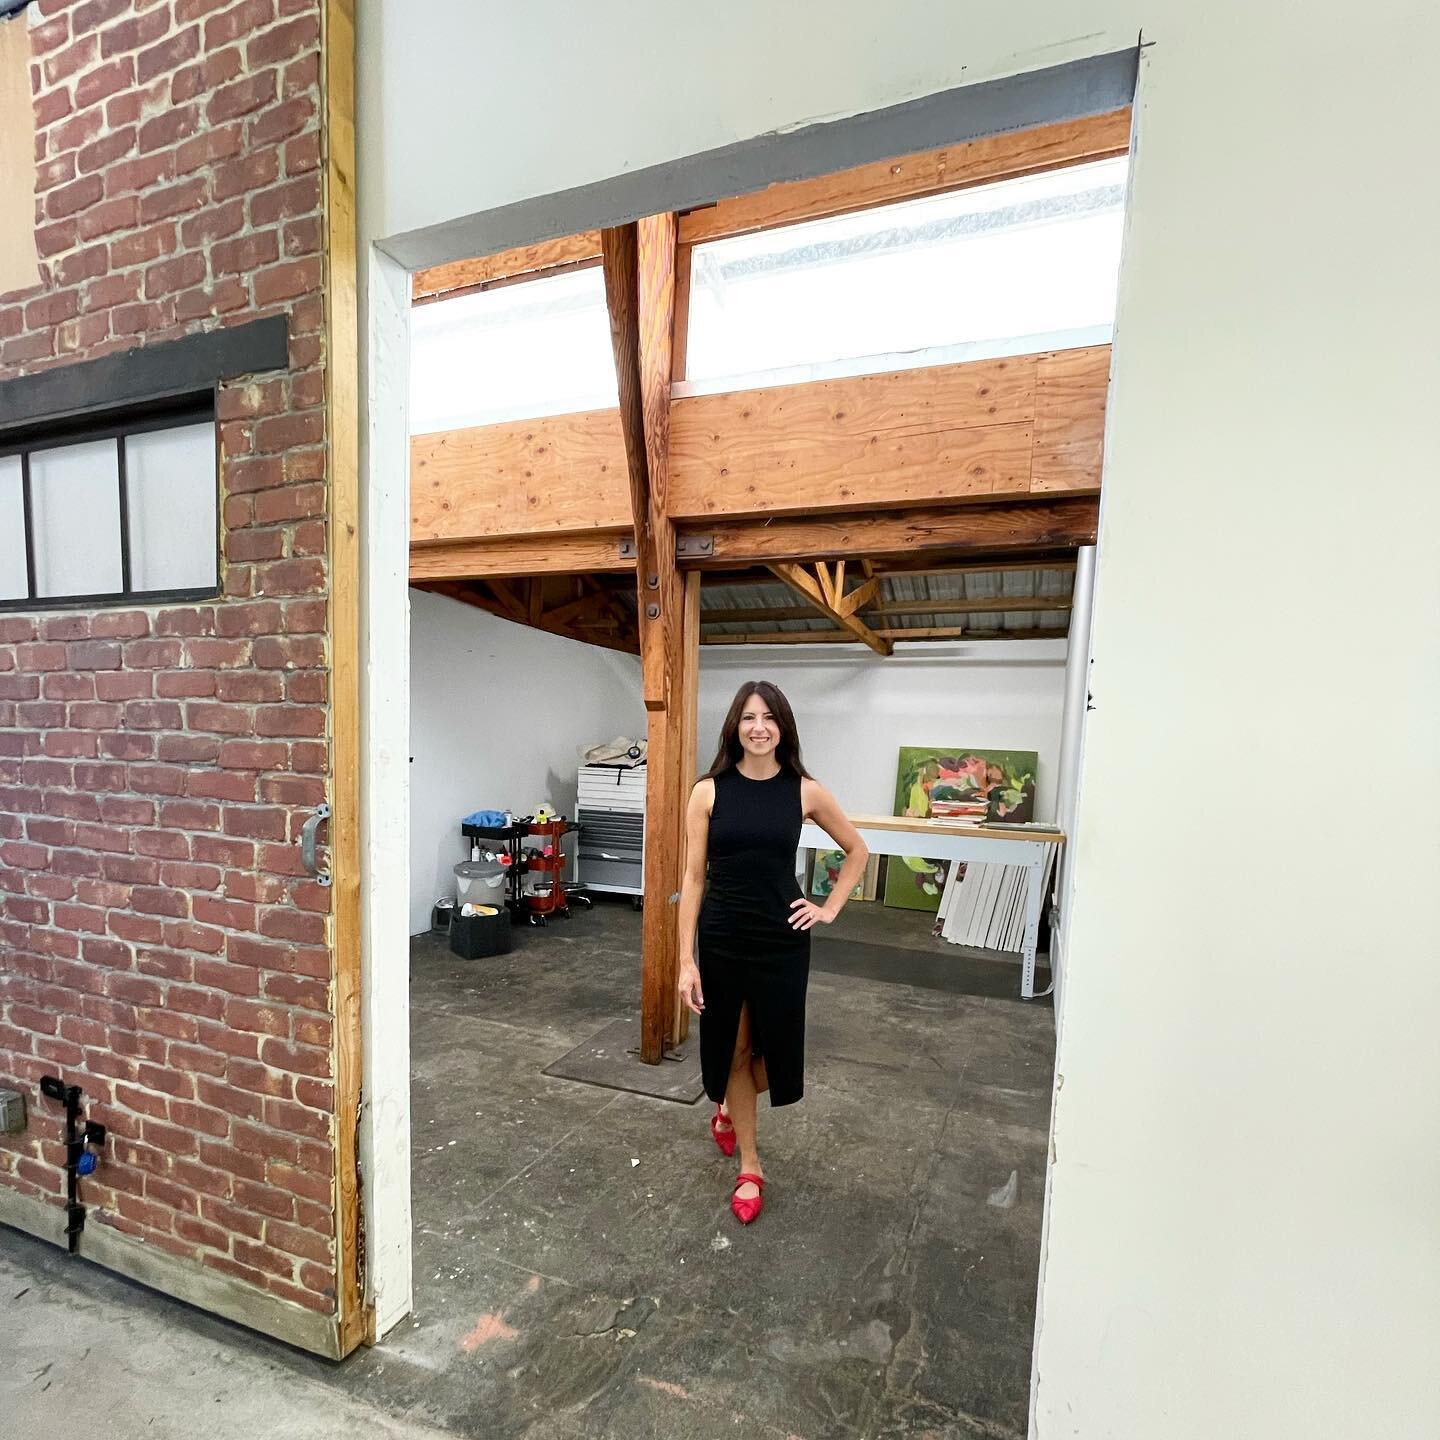 Same building, new space. Let&rsquo;s see what happens here! 💫 @keystoneartla